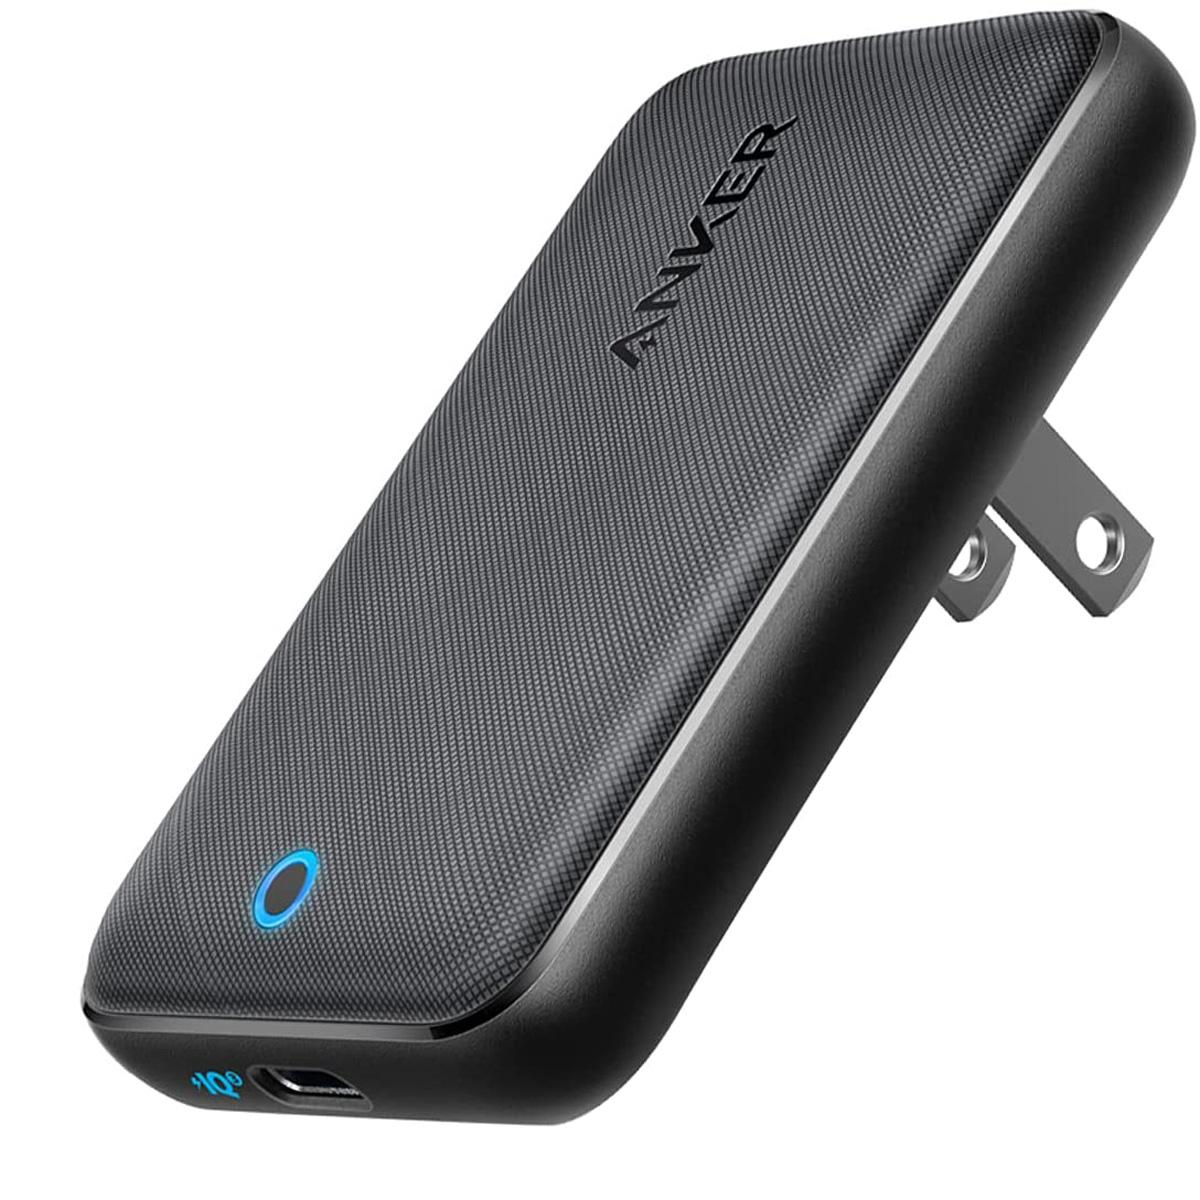 Anker 30W USB C GaN Power Delivery PIQ 3.0 Wall Charger for $18.99 Shipped